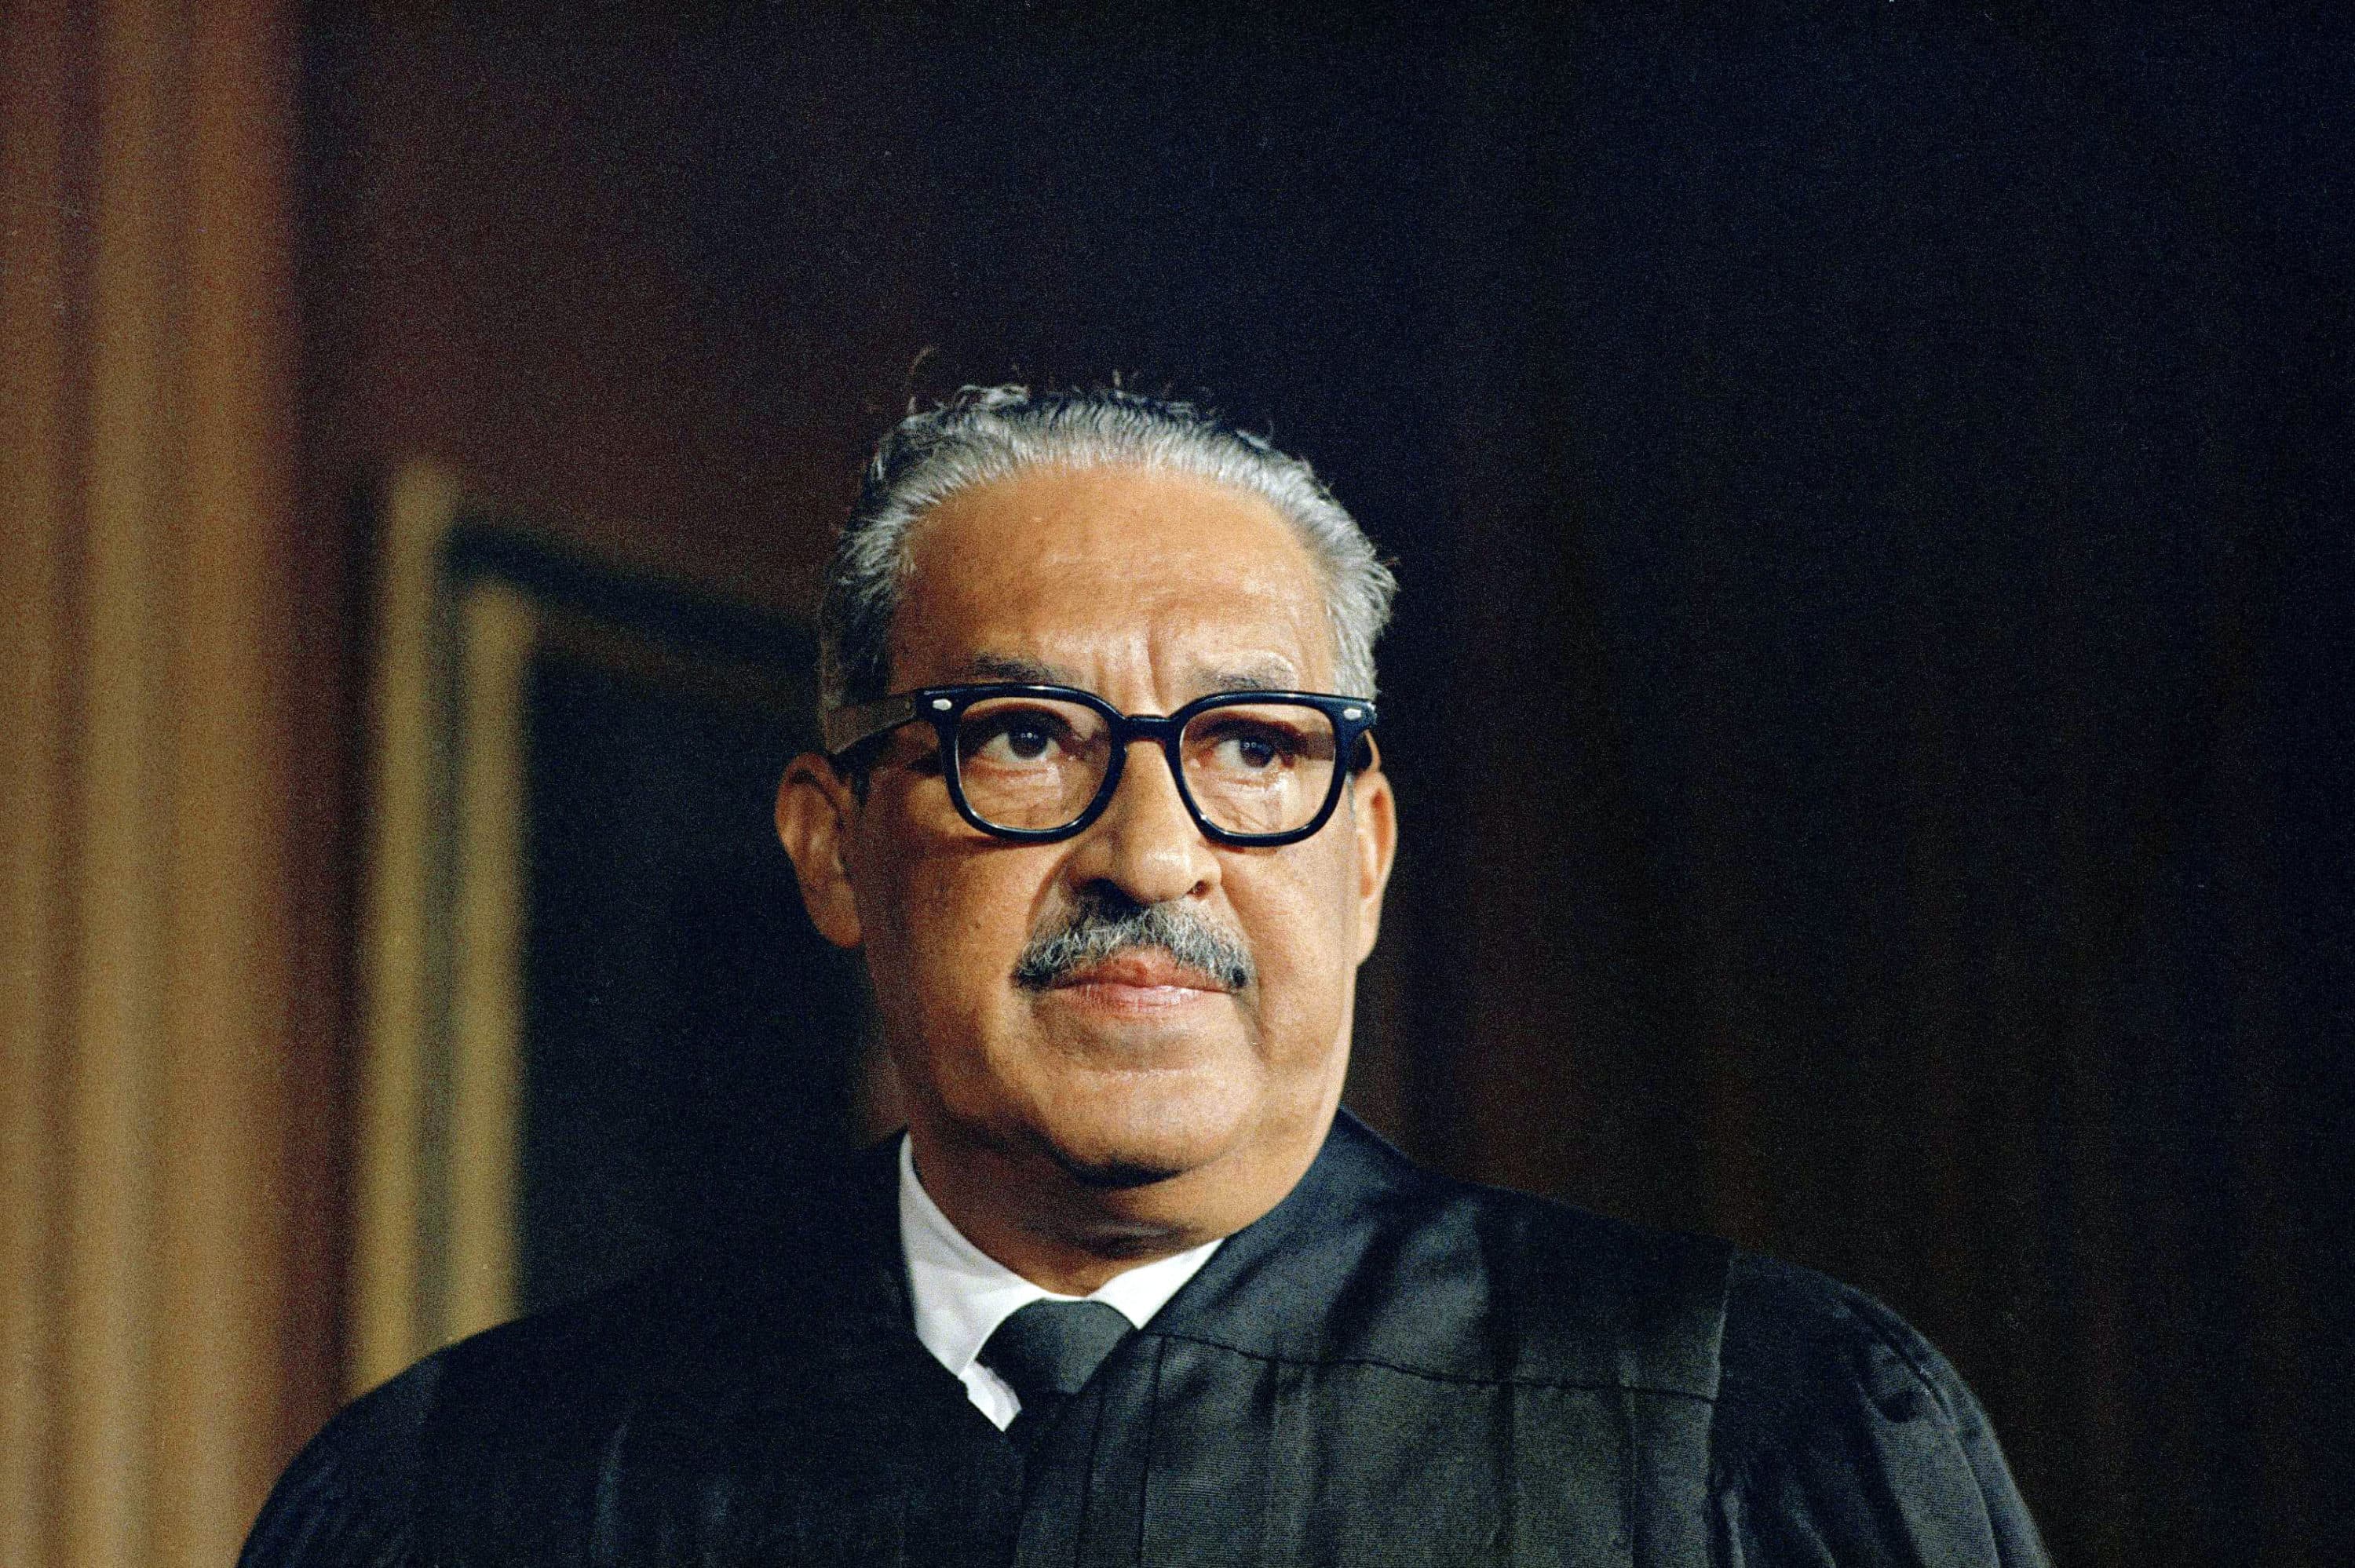 Thurgood Marshall, first Black Associate Justice of the Supreme Court, is photographed on his first day in court wearing judicial robes on Oct. 2, 1967. (Bob Schutz/AP)